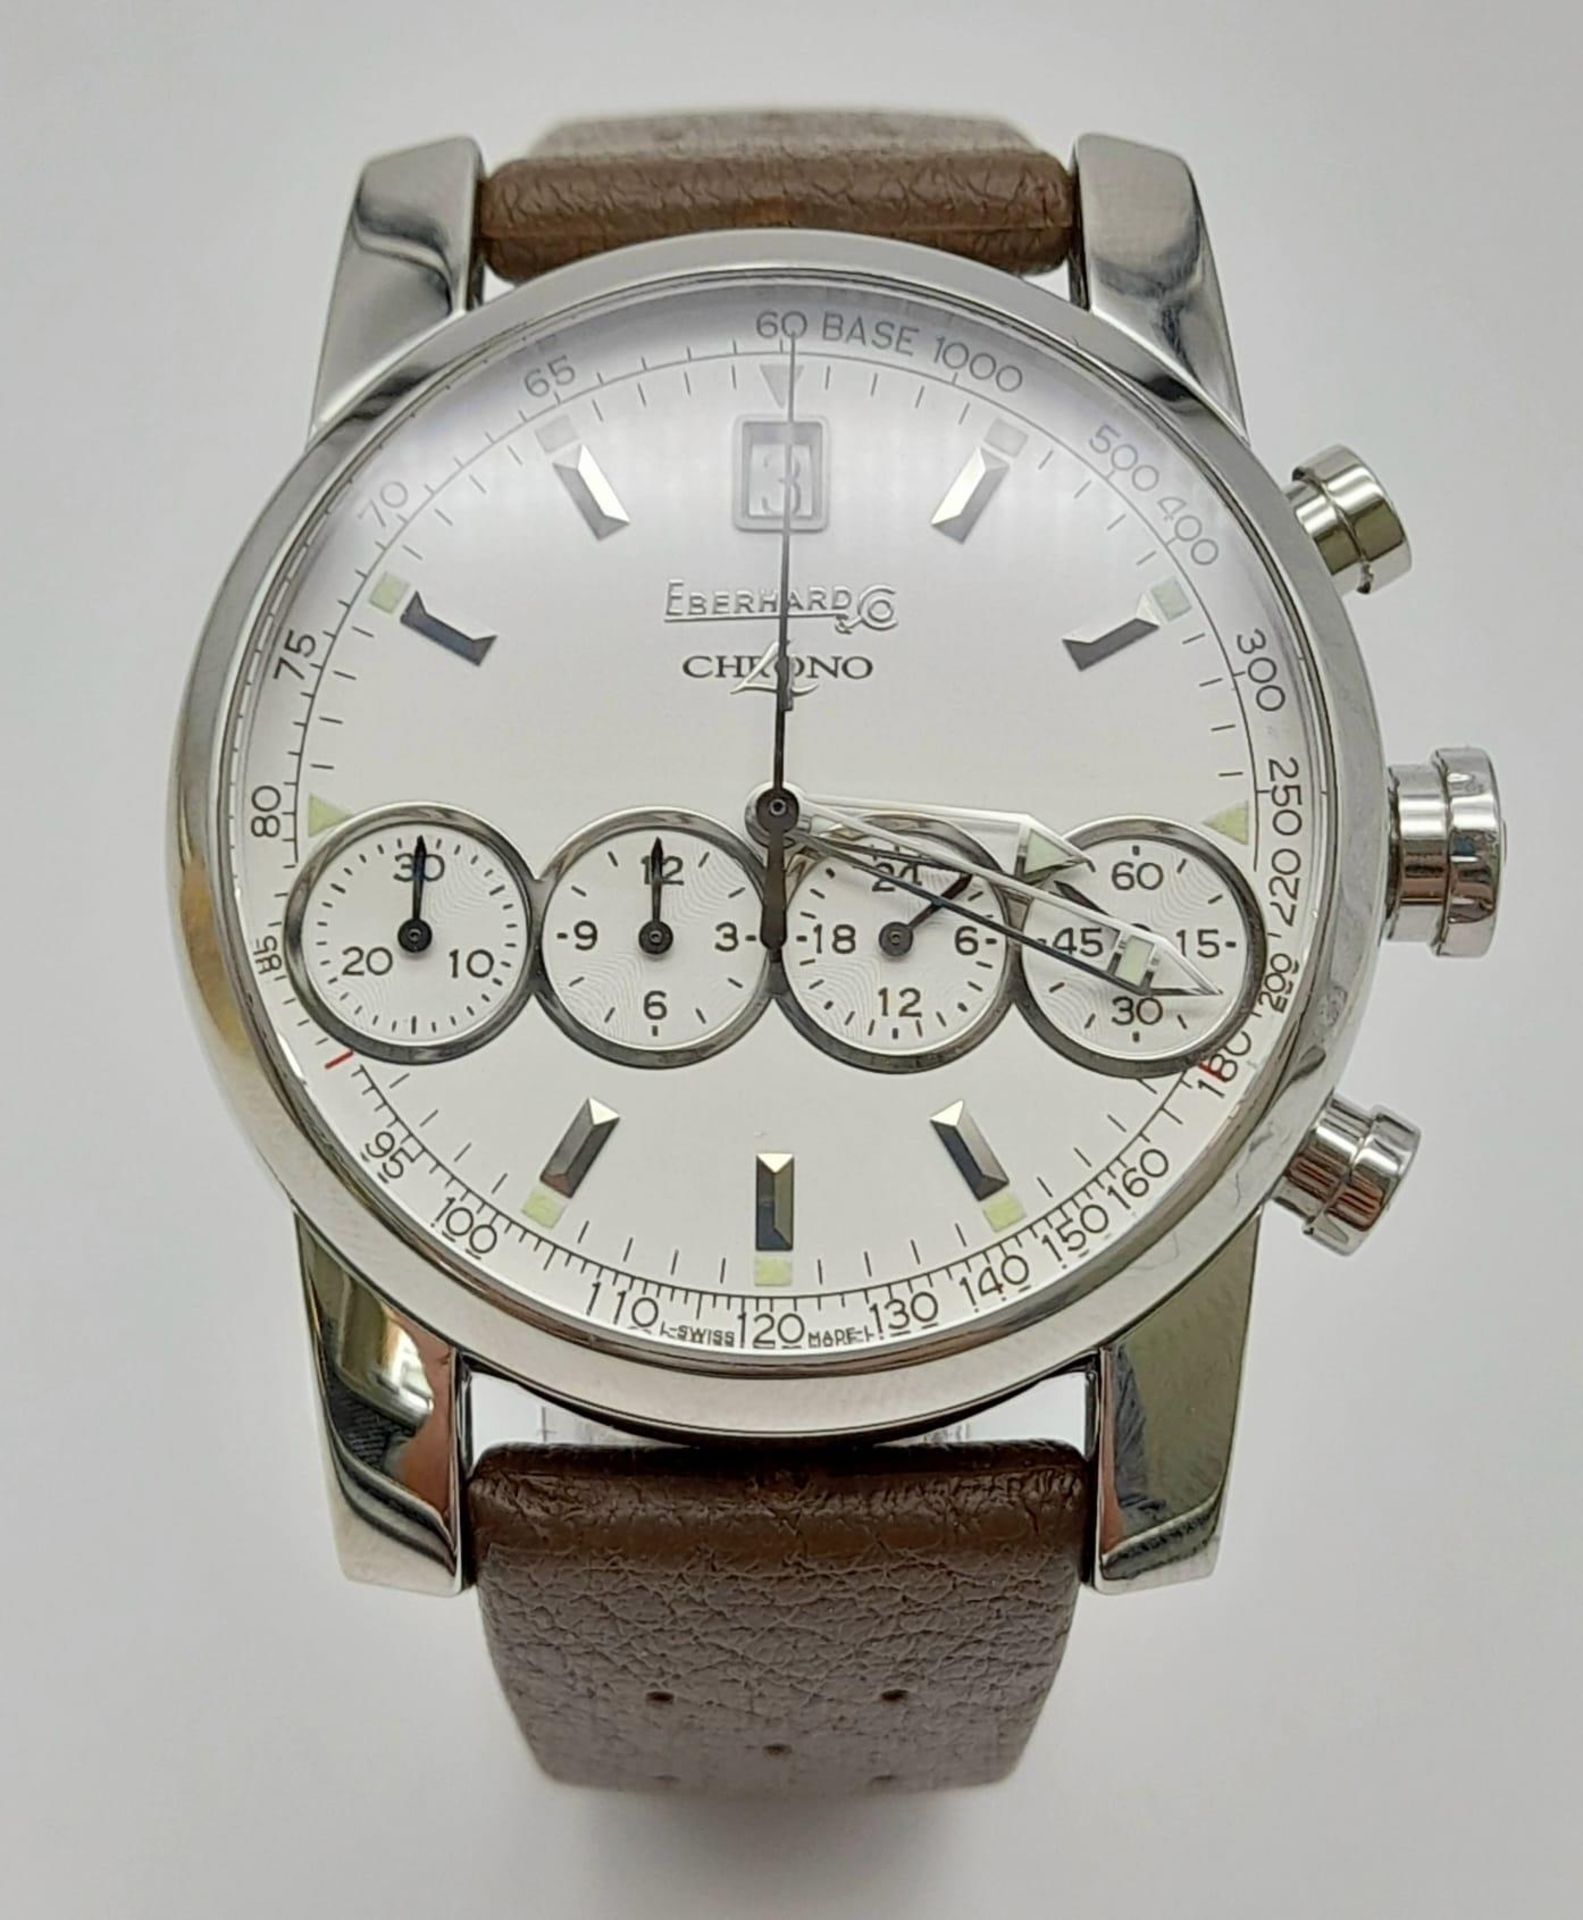 A stainless steel EBERHARD & CO CHRONO watch. Case 40 mm, white dial with four sub-dials and